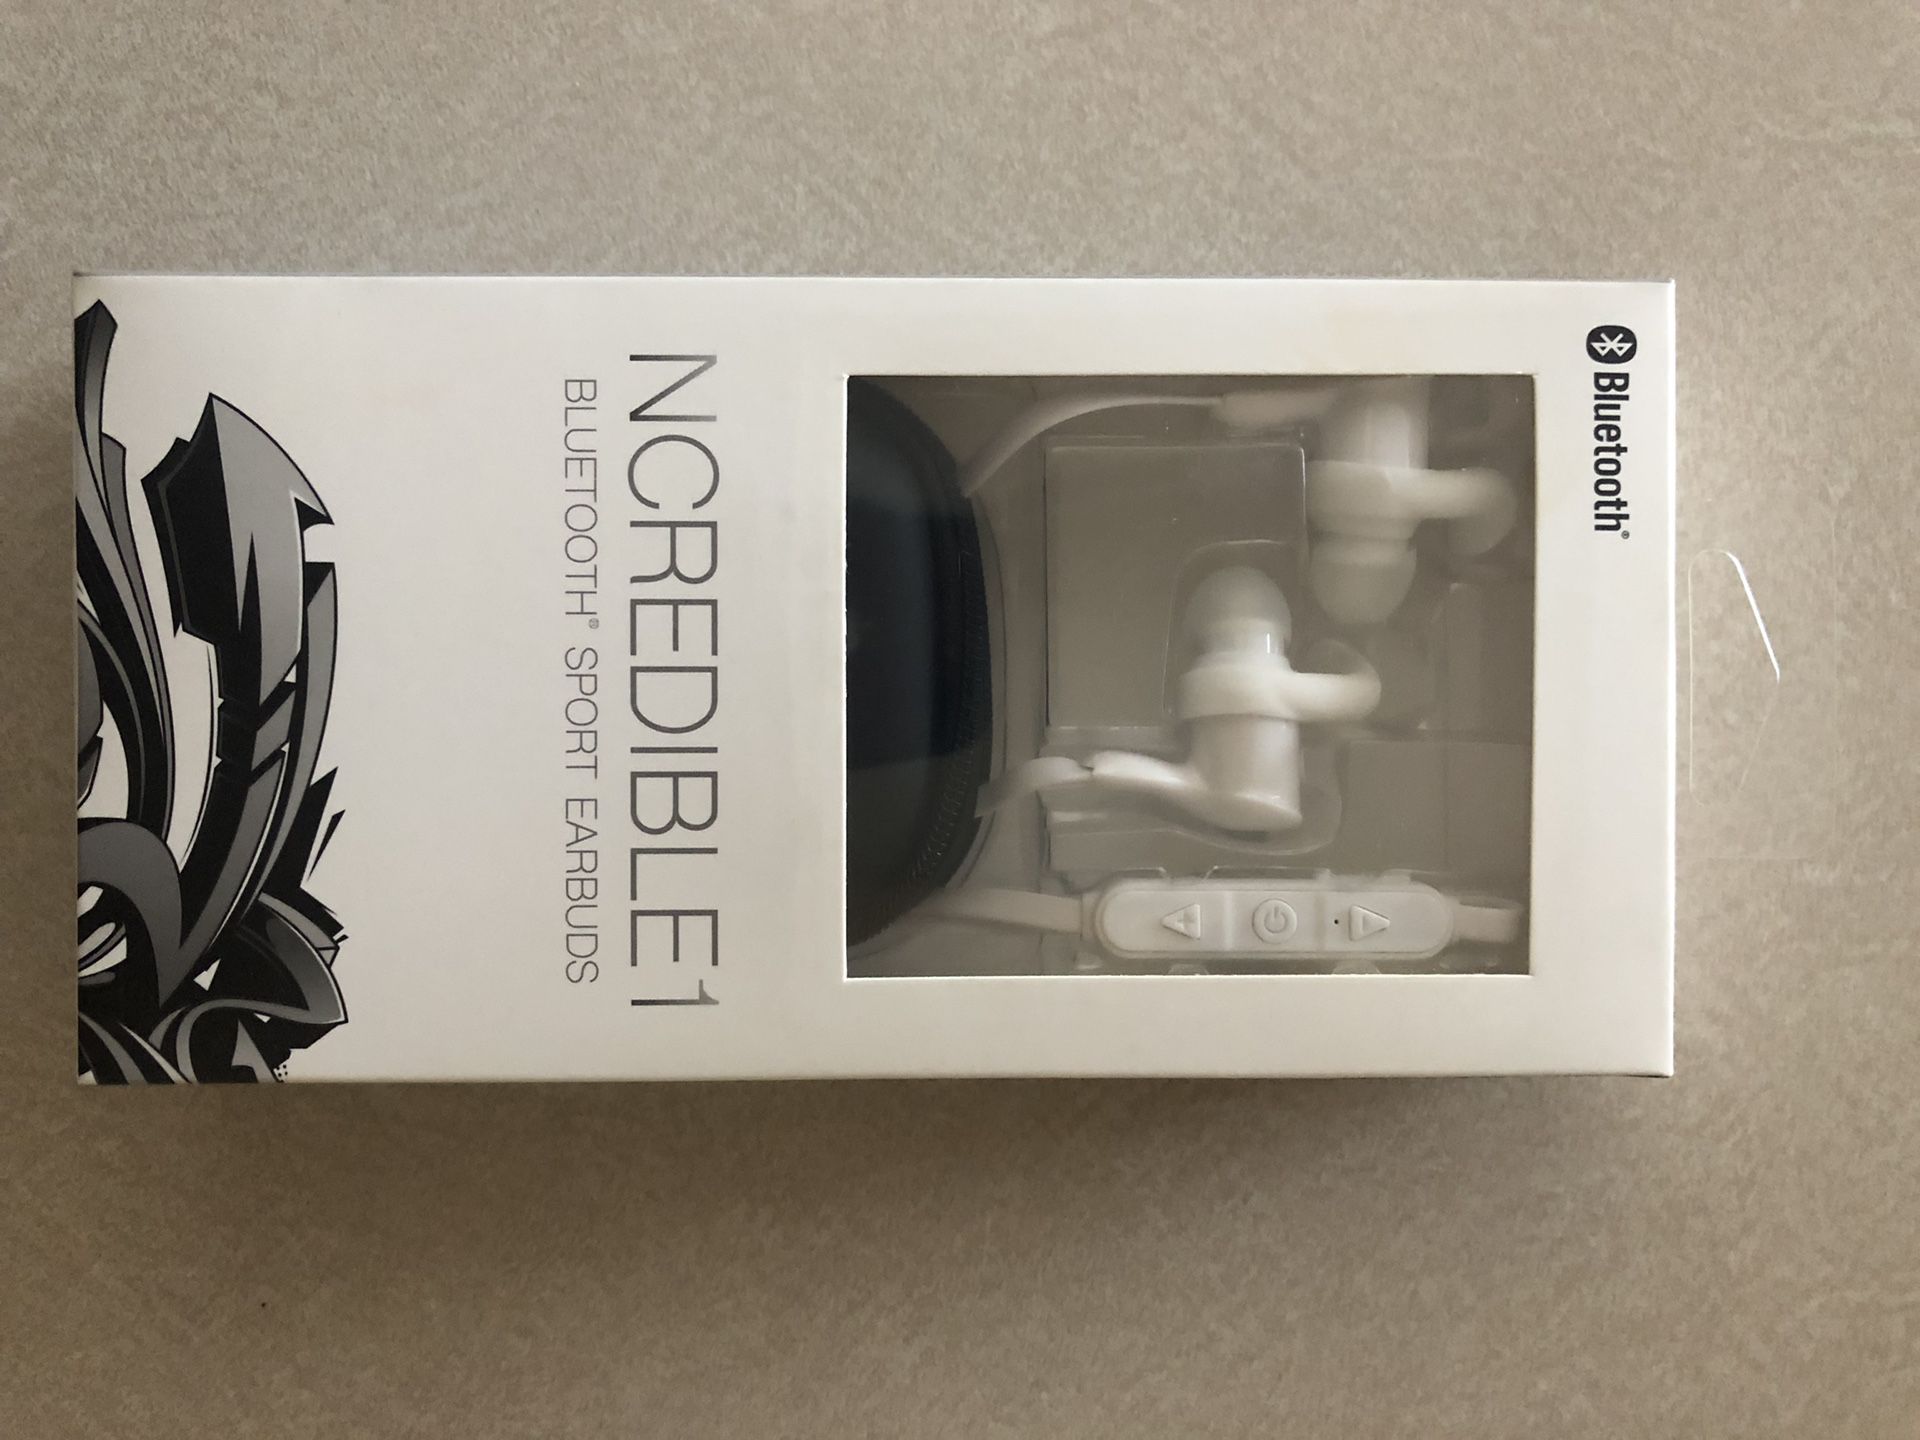 NCredible 1 Bluetooth Sport Earbuds